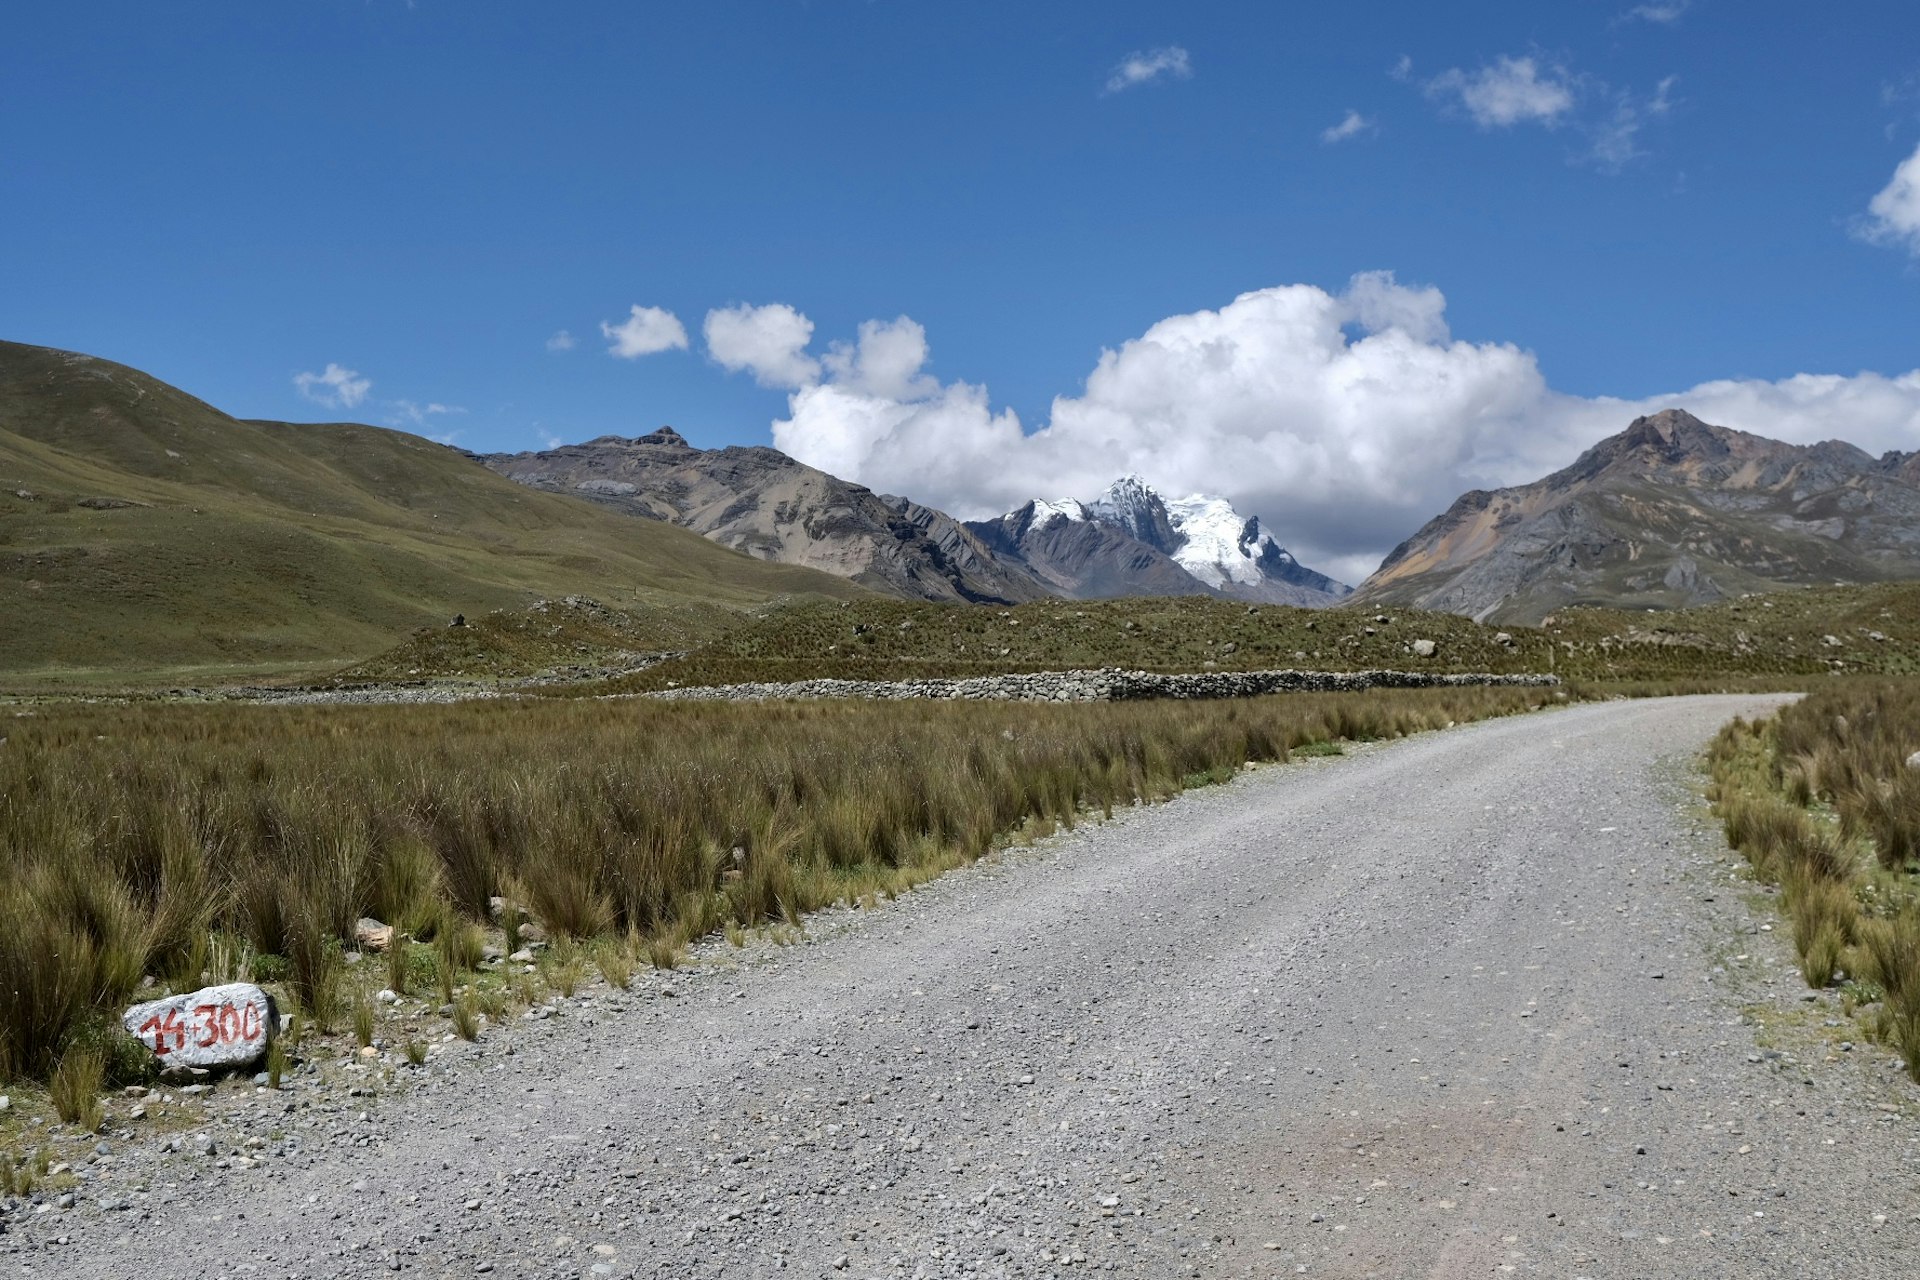 A gravel road cuts through rough grassland heading up towards a snow-covered mountain peak in the distance